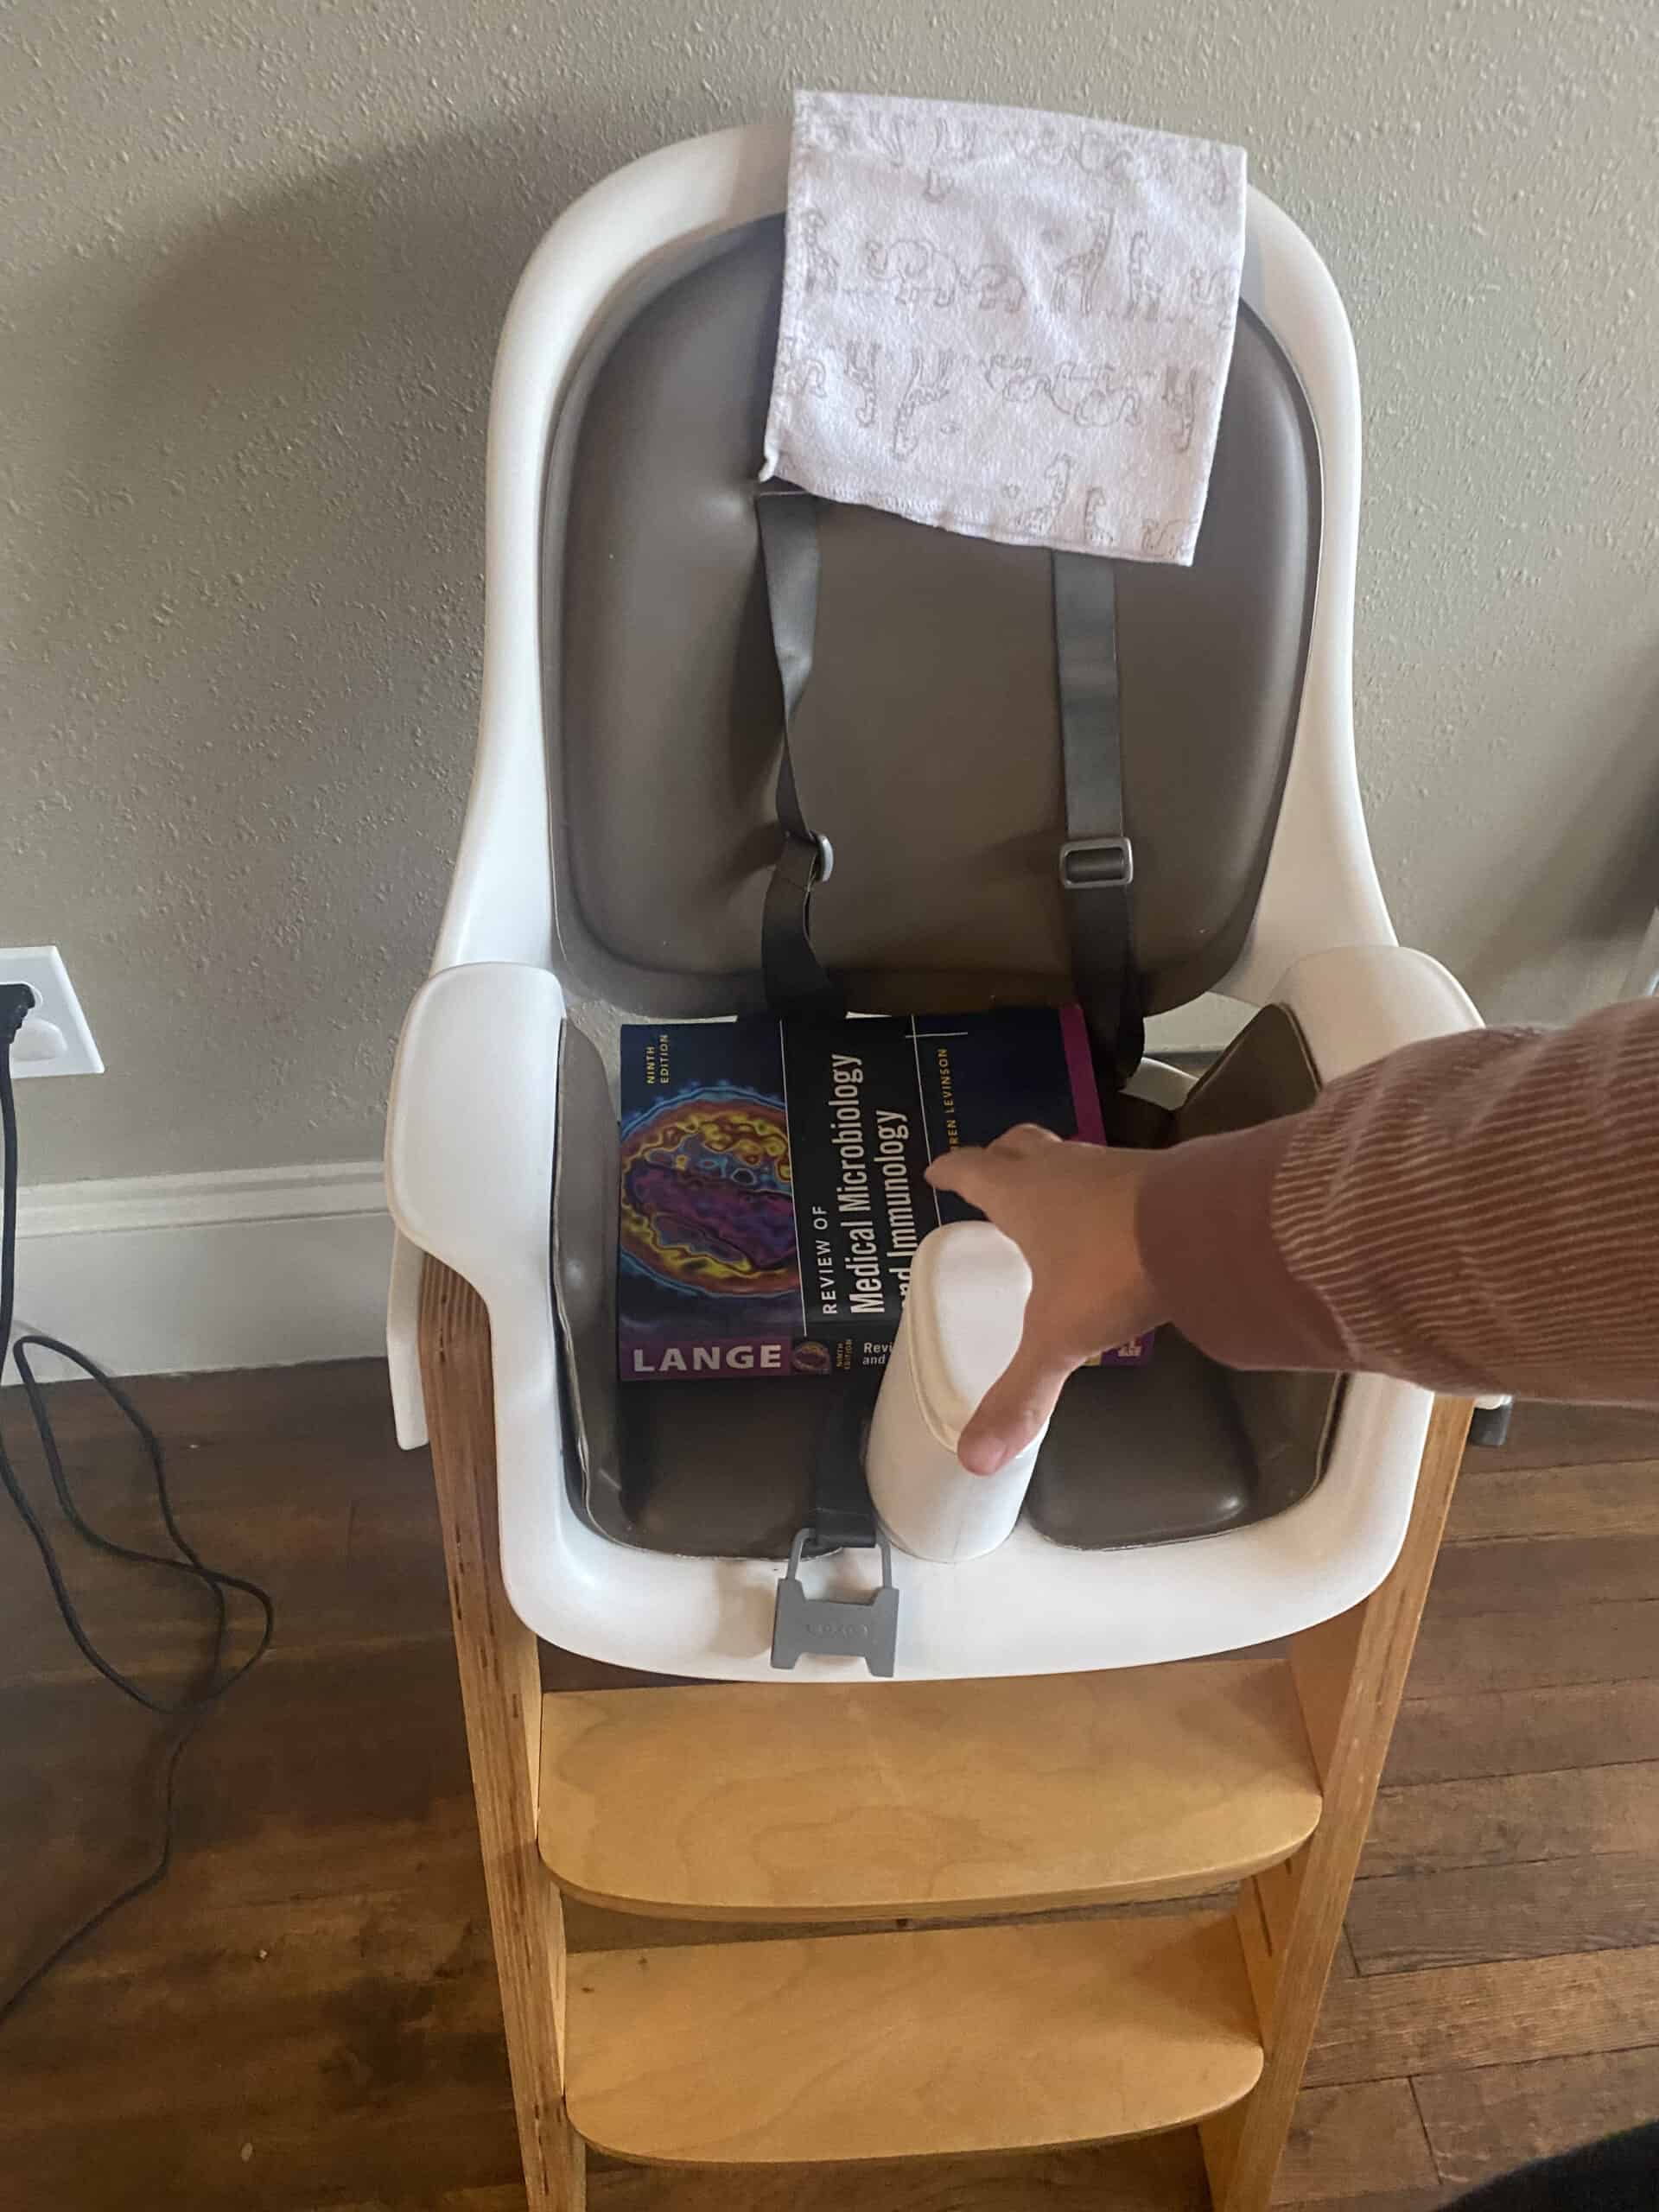 All Purpose High Chair with Padded Seat and Back :: arthritis post